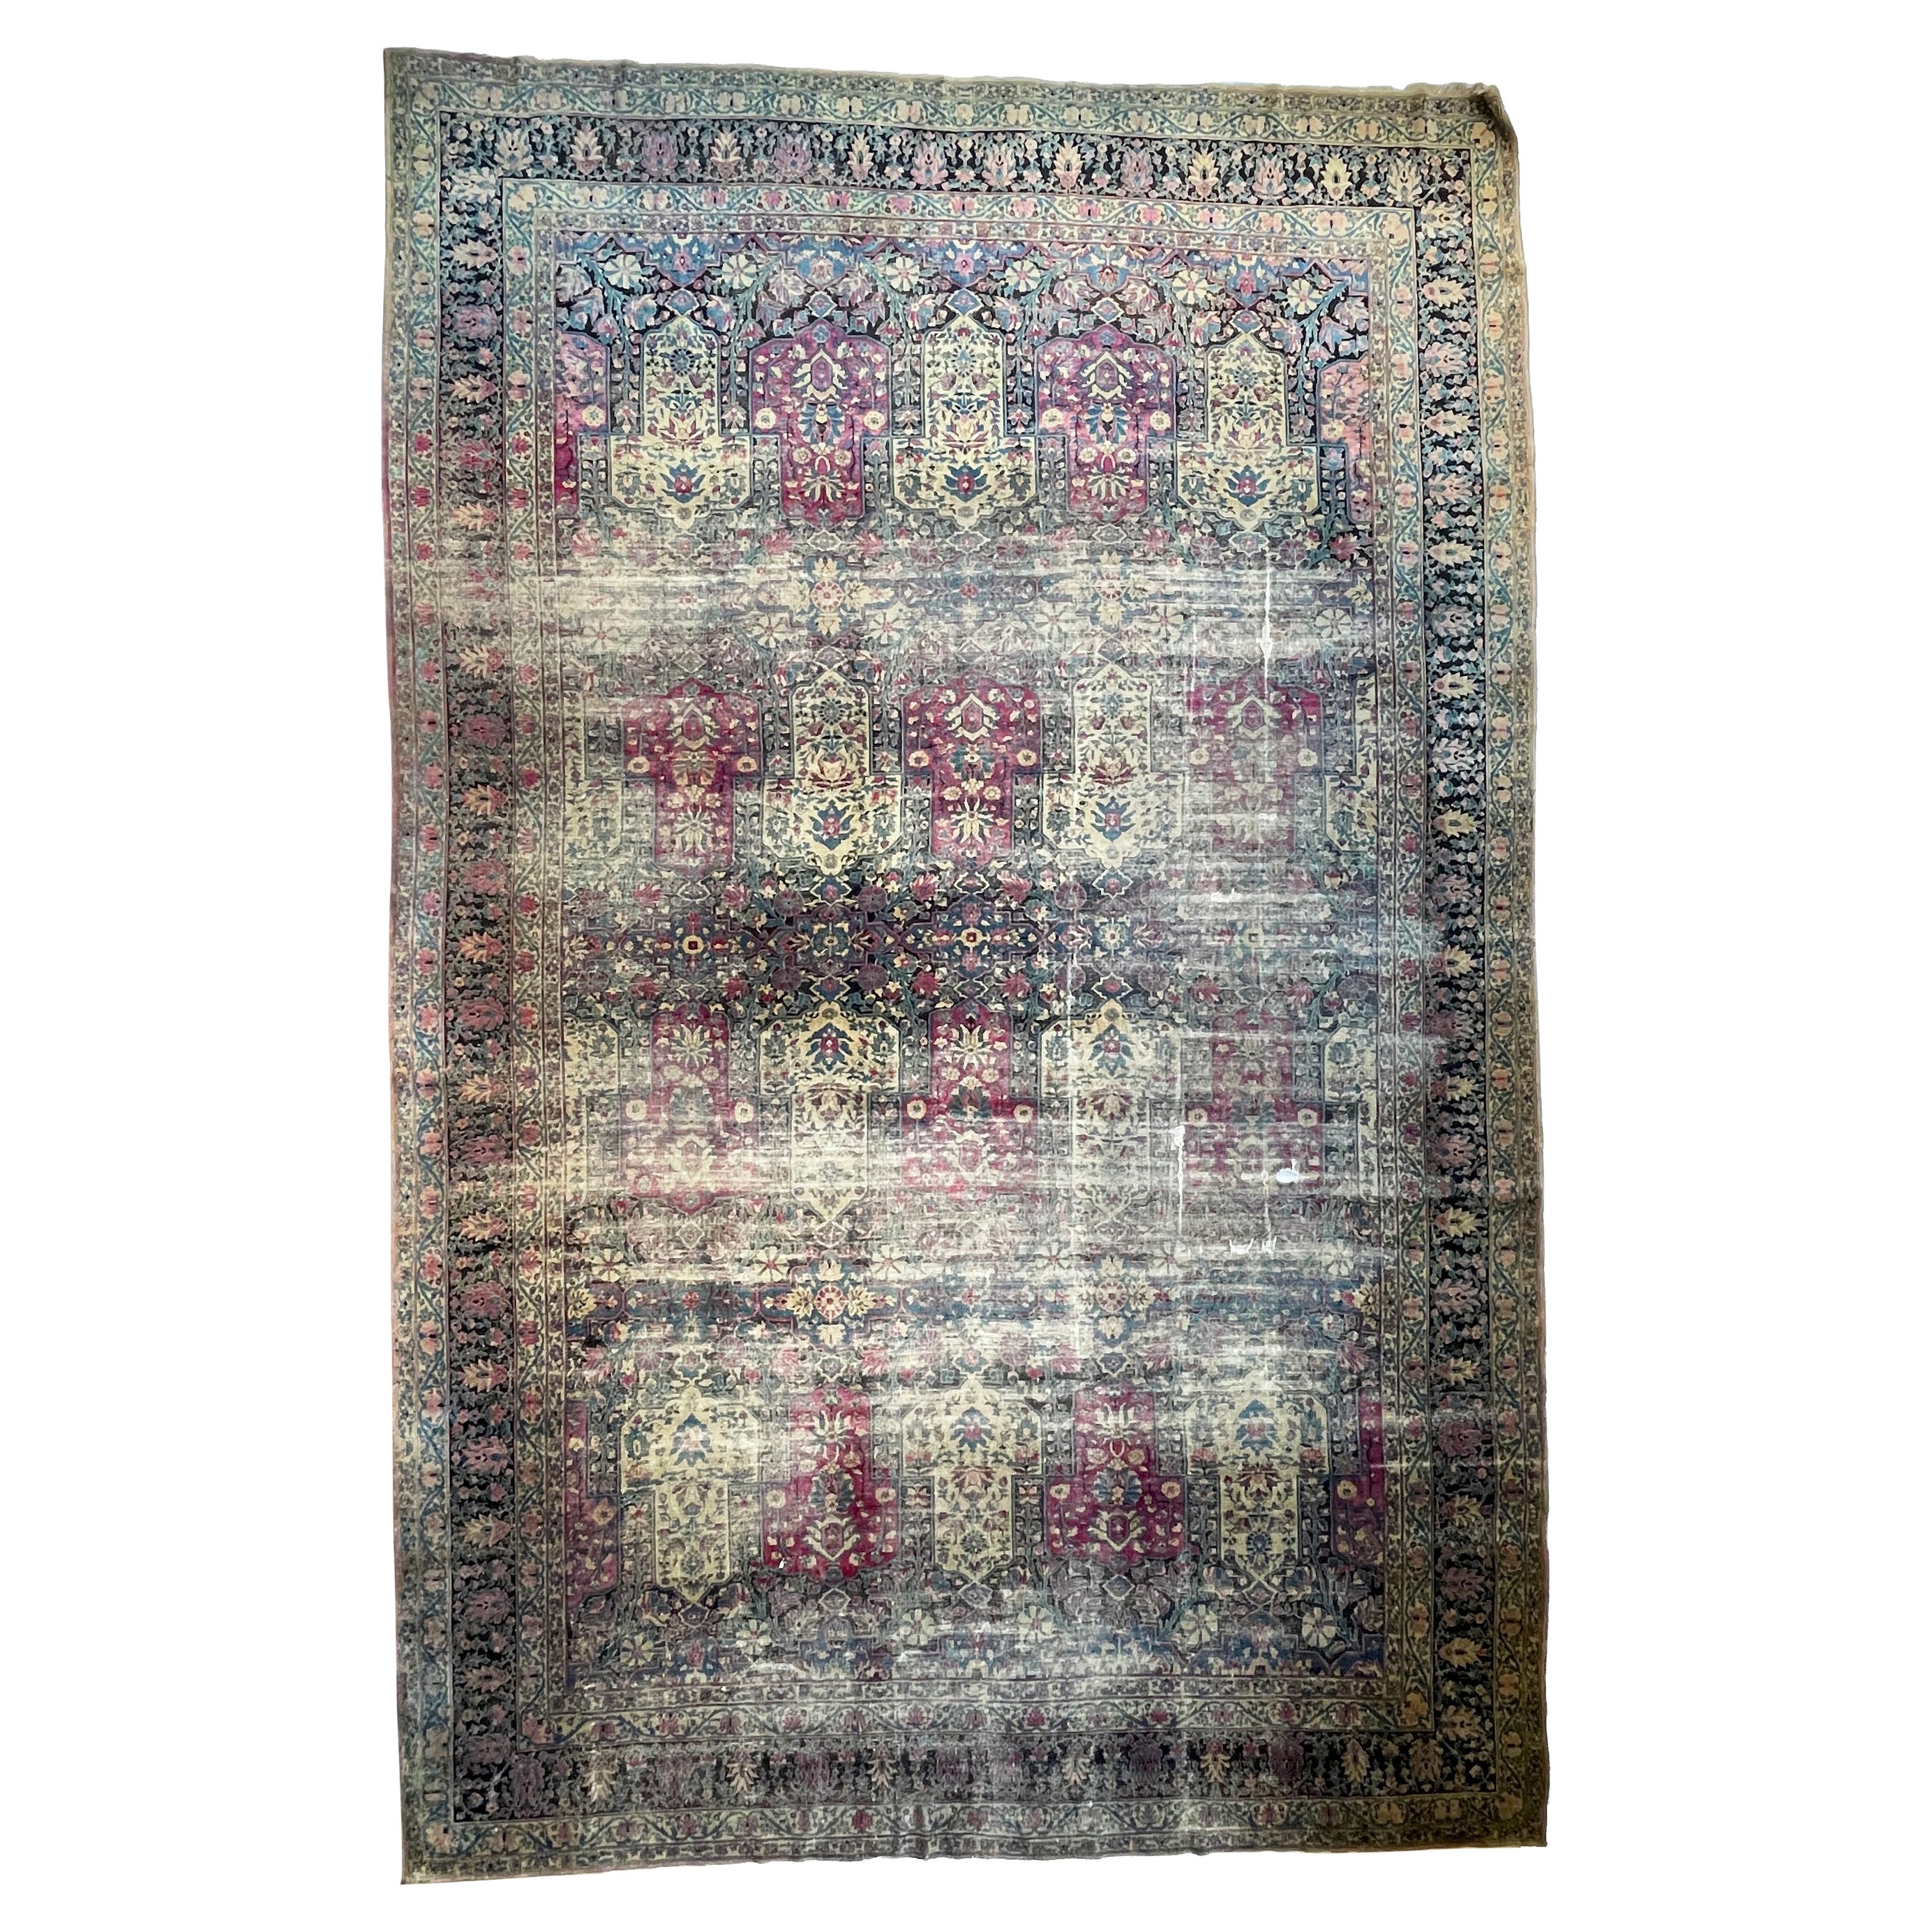 Palace Size Iconic Garden Inspired Design Rug, c. 1900's